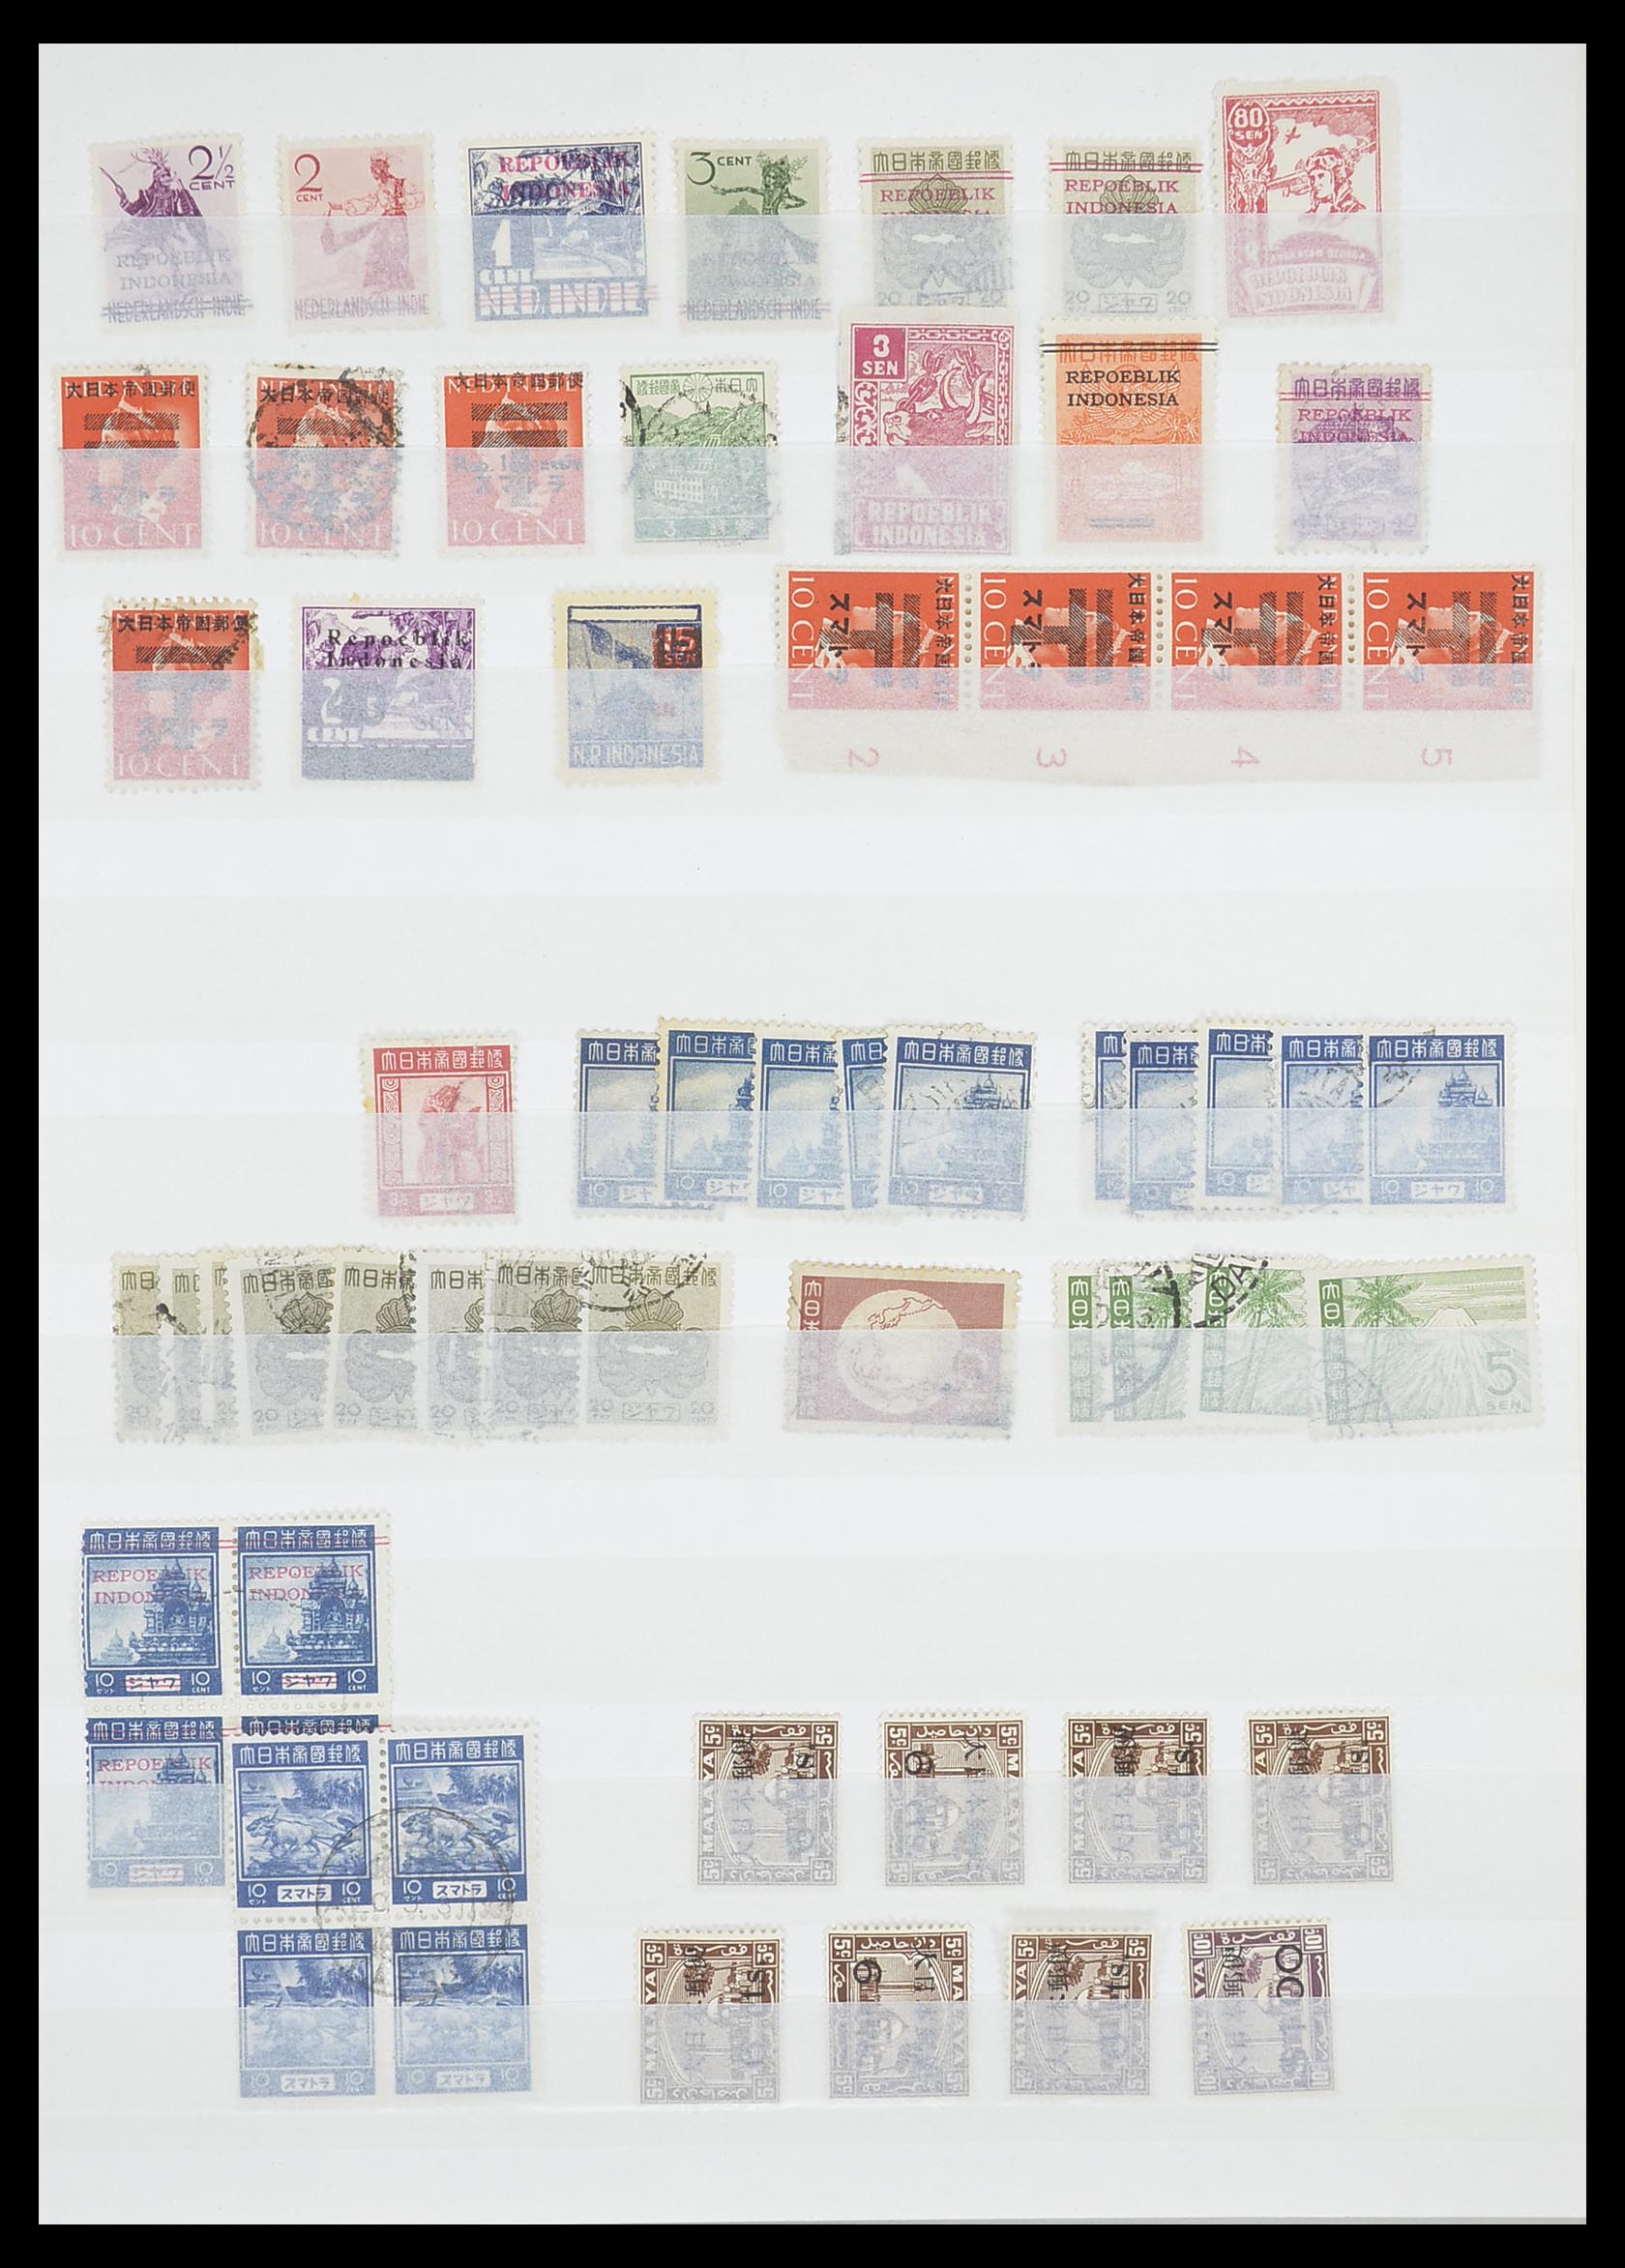 33489 001 - Stamp collection 33489 Japanese occupation Dutch east Indies and interim